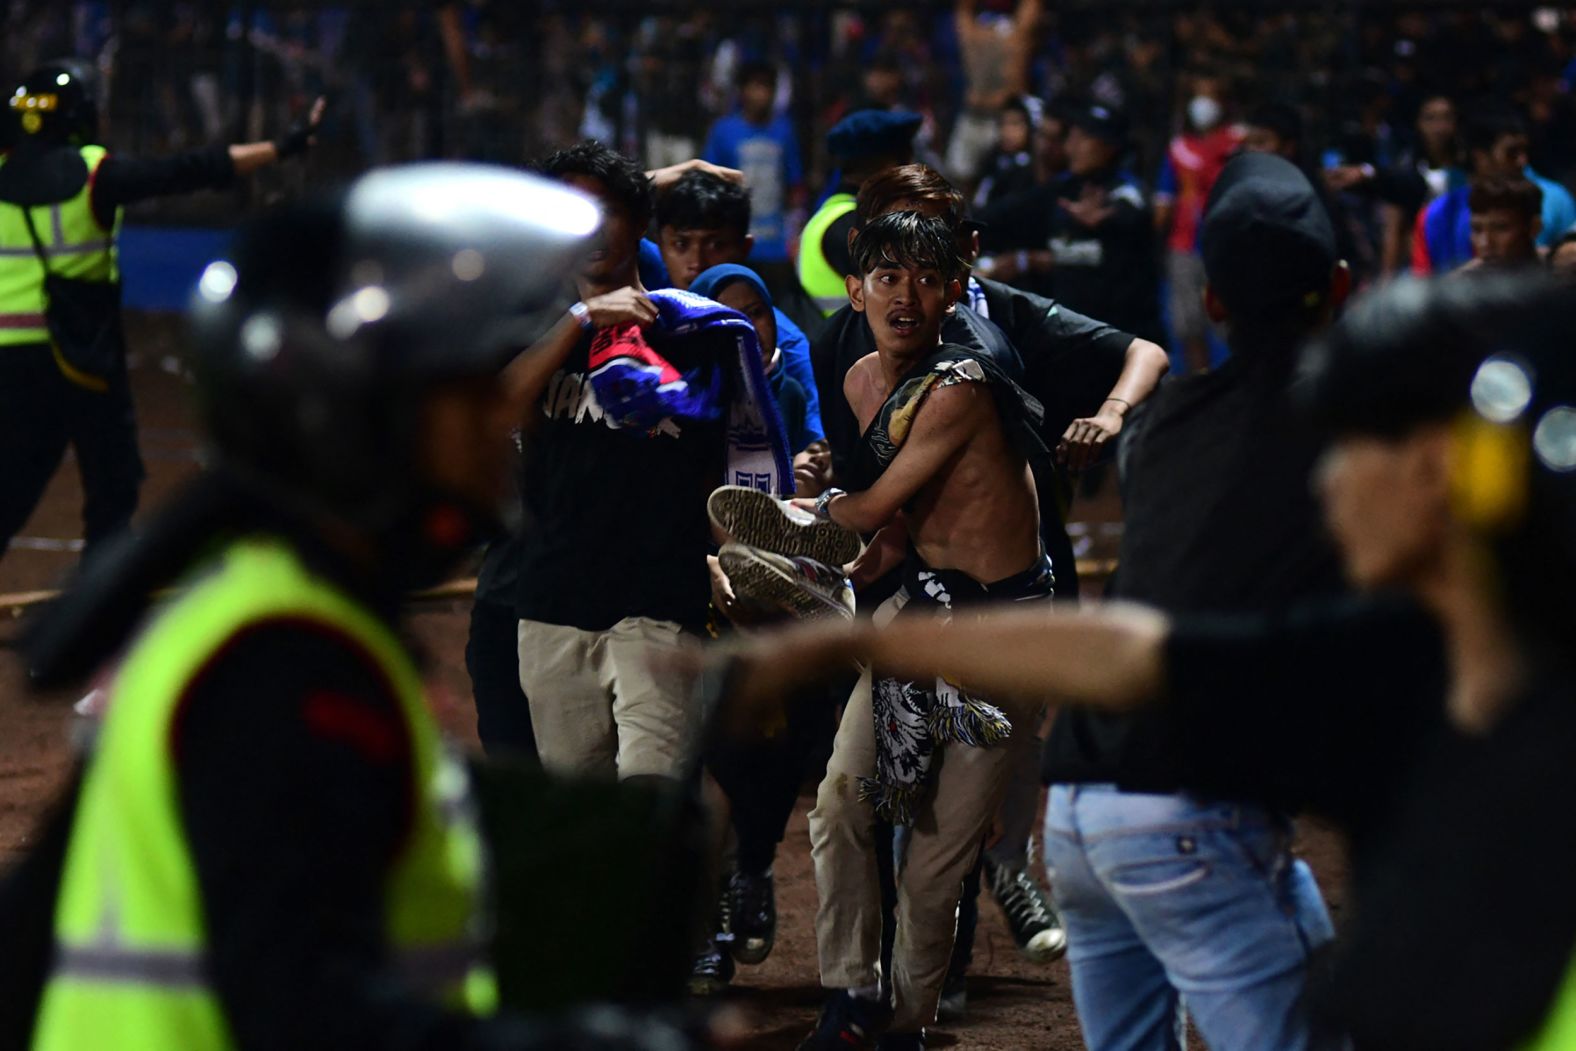 People carry an injured man after <a href="https://www.cnn.com/2022/10/01/asia/indonesia-soccer-stadium-stampede-persebaya-surabaya-arema-fc-intl-hnk" target="_blank">chaos and violence erupted</a> during a soccer match between Arema FC and Persebaya Surabaya on Saturday, October 1, at the Kanjuruhan Stadium in Malang, Indonesia. At least 125 people were killed, according to Indonesia's National Police Chief, in what is one of the world's deadliest stadium disasters of all time.